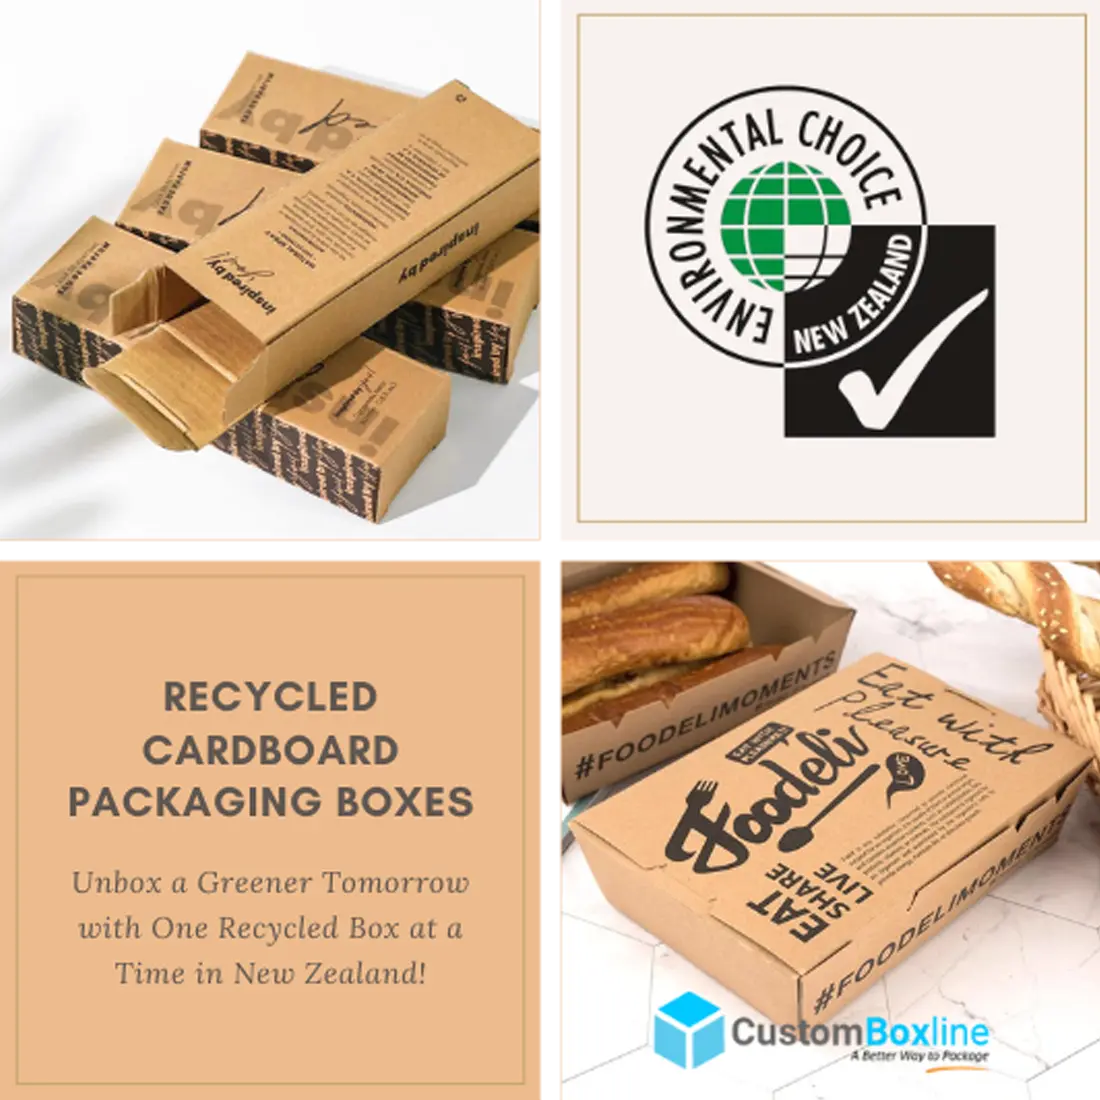 Recycled Cardboard Packaging Boxes